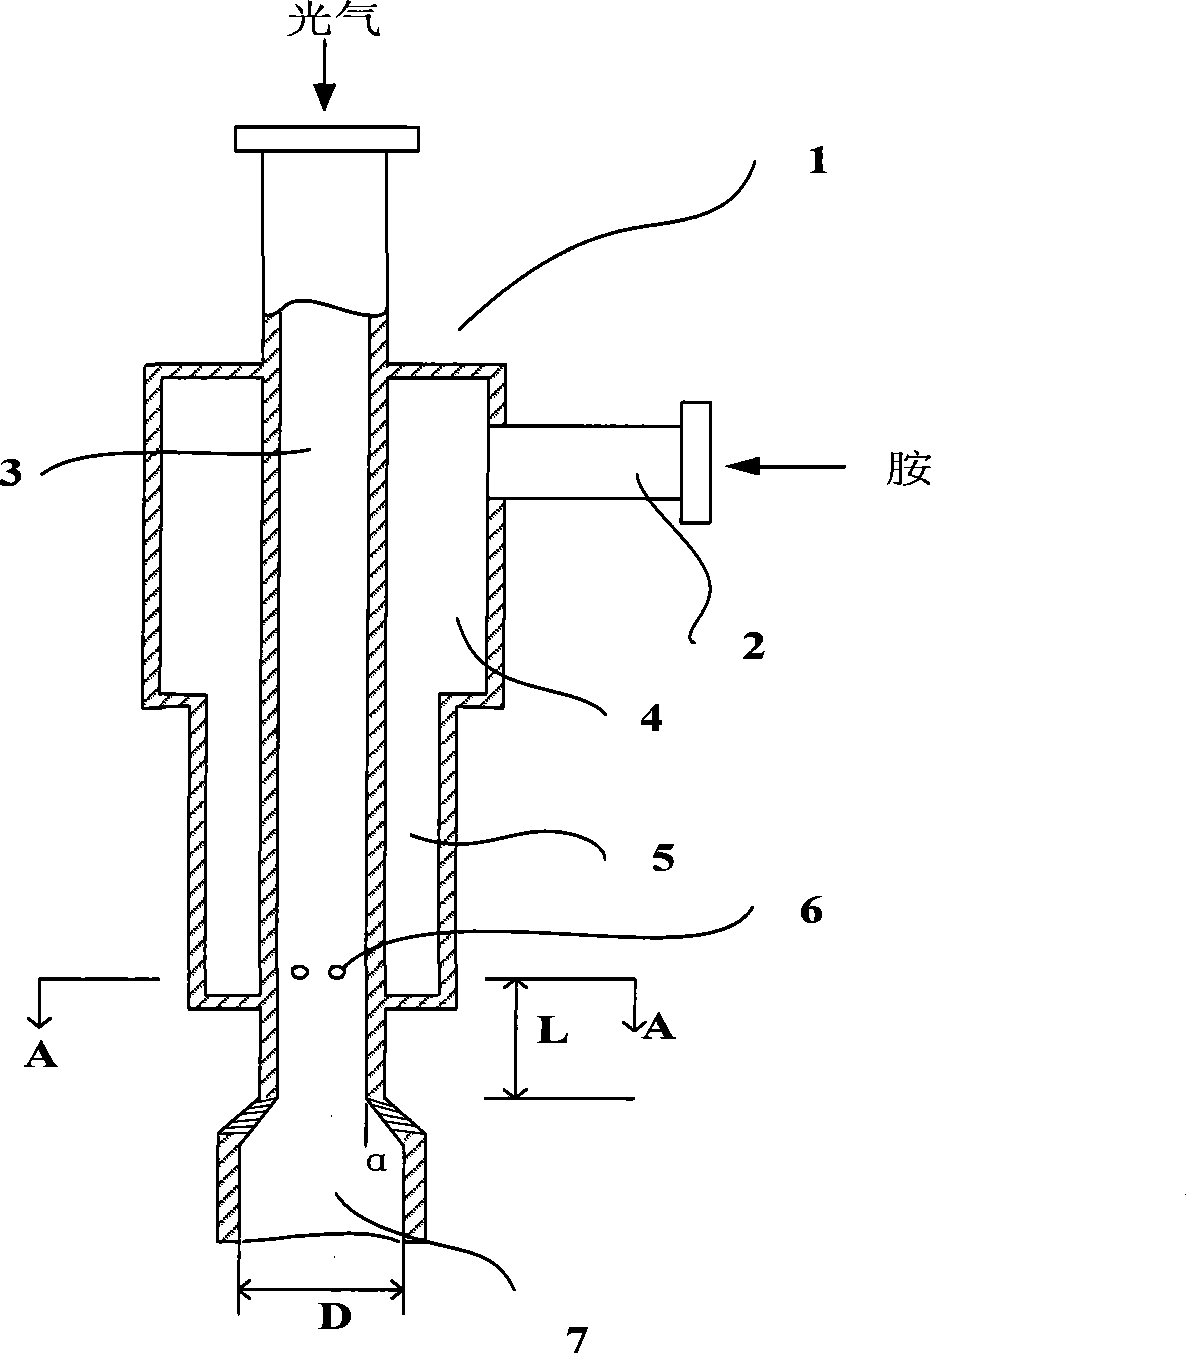 Draft tube type jet flow reactor and method for preparing isocyanate using the same